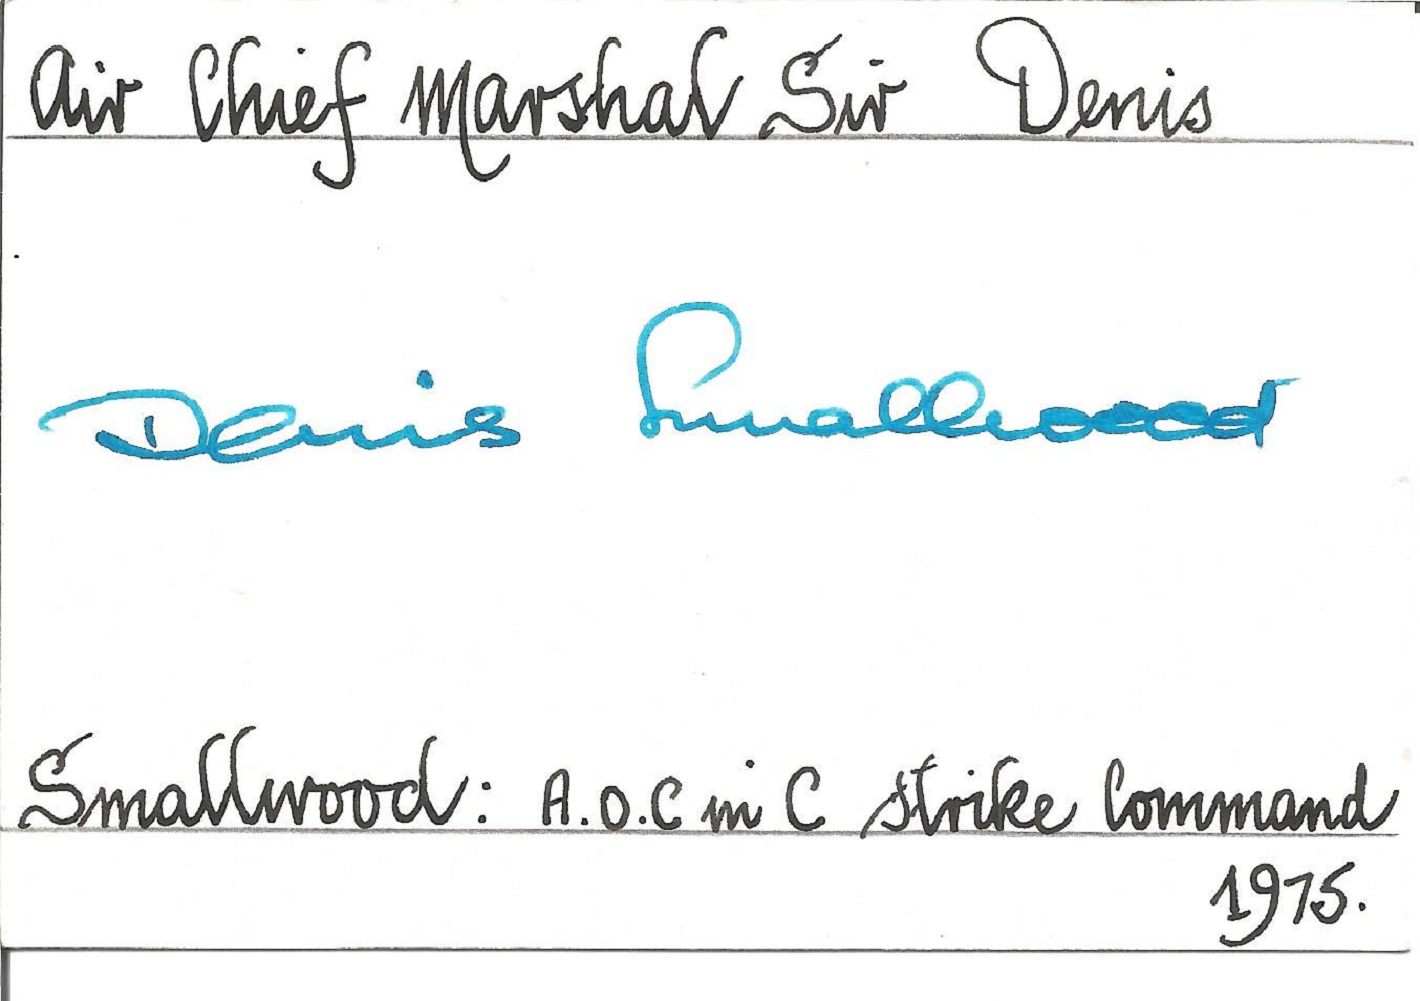 ACM Sir Denis Smallwood signed 6 x 4 white card with name and details neatly written to top and